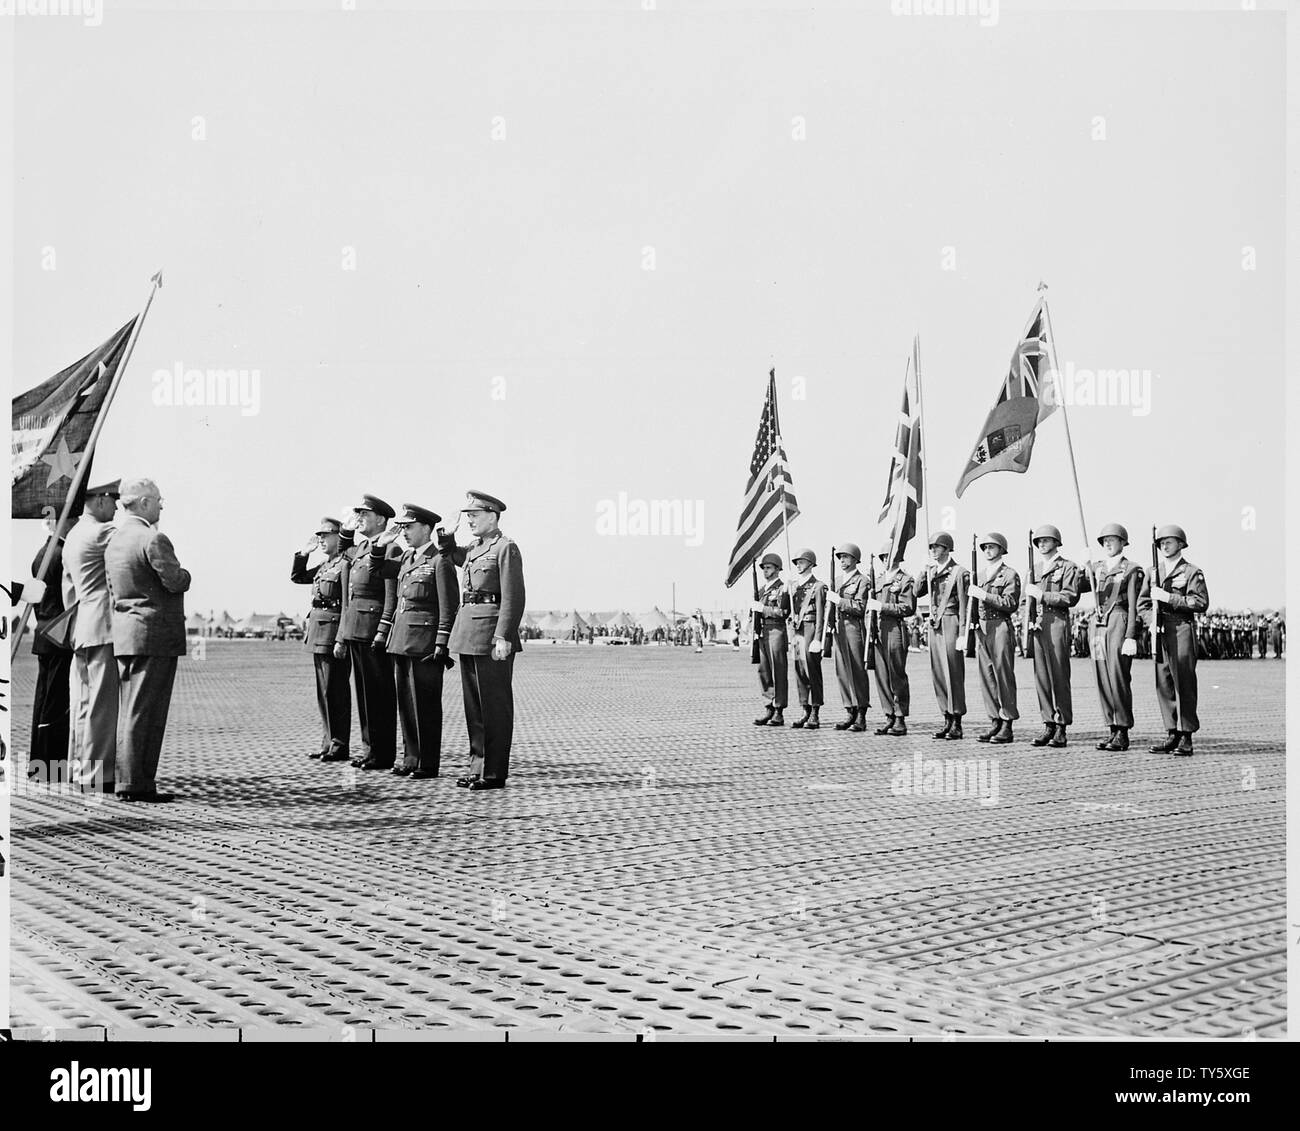 In a ceremony at the airport in Frankfort, Germany, President Harry S. Truman (third from left) presents Distinguished Service Medals to (opposite the President, L to R:) Gen. H. D. G. Crerar, Canadian Army, Air Marshall Sir Arthur Coningham, Air Marshall Sir James Robb, and Maj. Gen. Sir F. W. Guingand. President Truman is in Frankfort to inspect U. S. troops during a break in the Potsdam Conference. Stock Photo